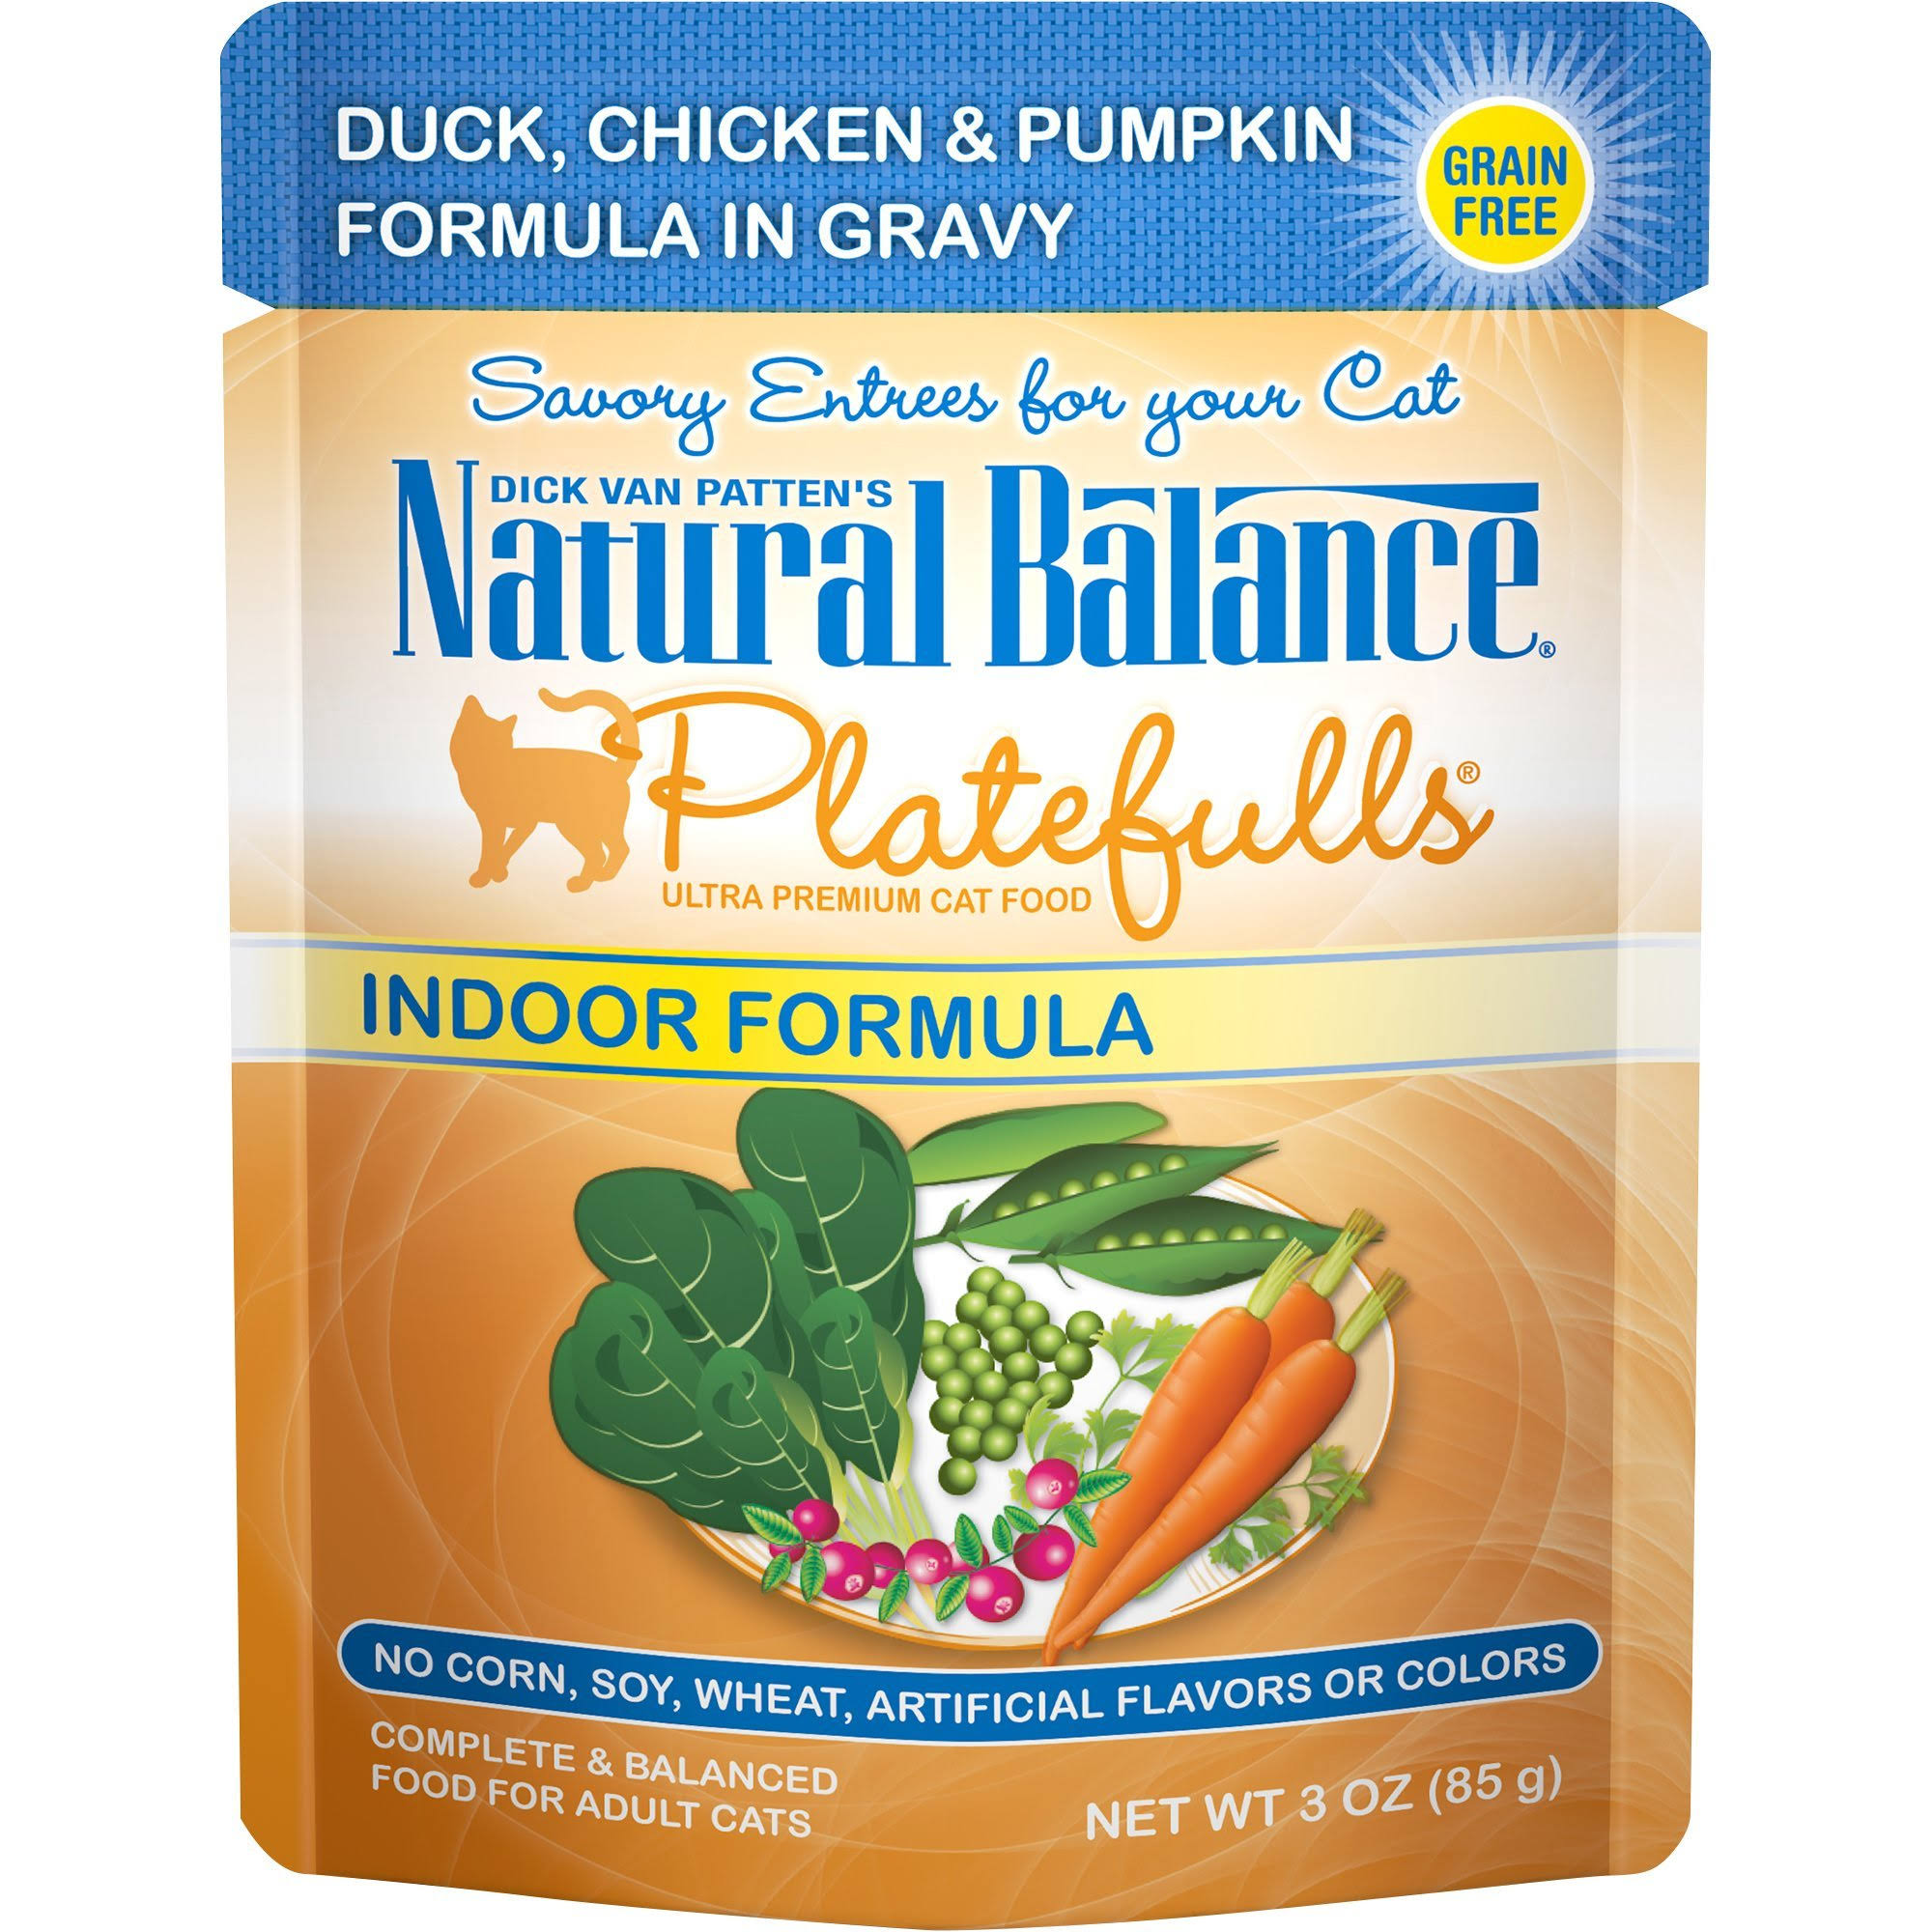 Natural Balance Platefulls Grain Free Indoor Cat Food, Duck, Chicken and Pumpkin Formula in Gravy, 3-Ounce Pouches (Pack of 24)